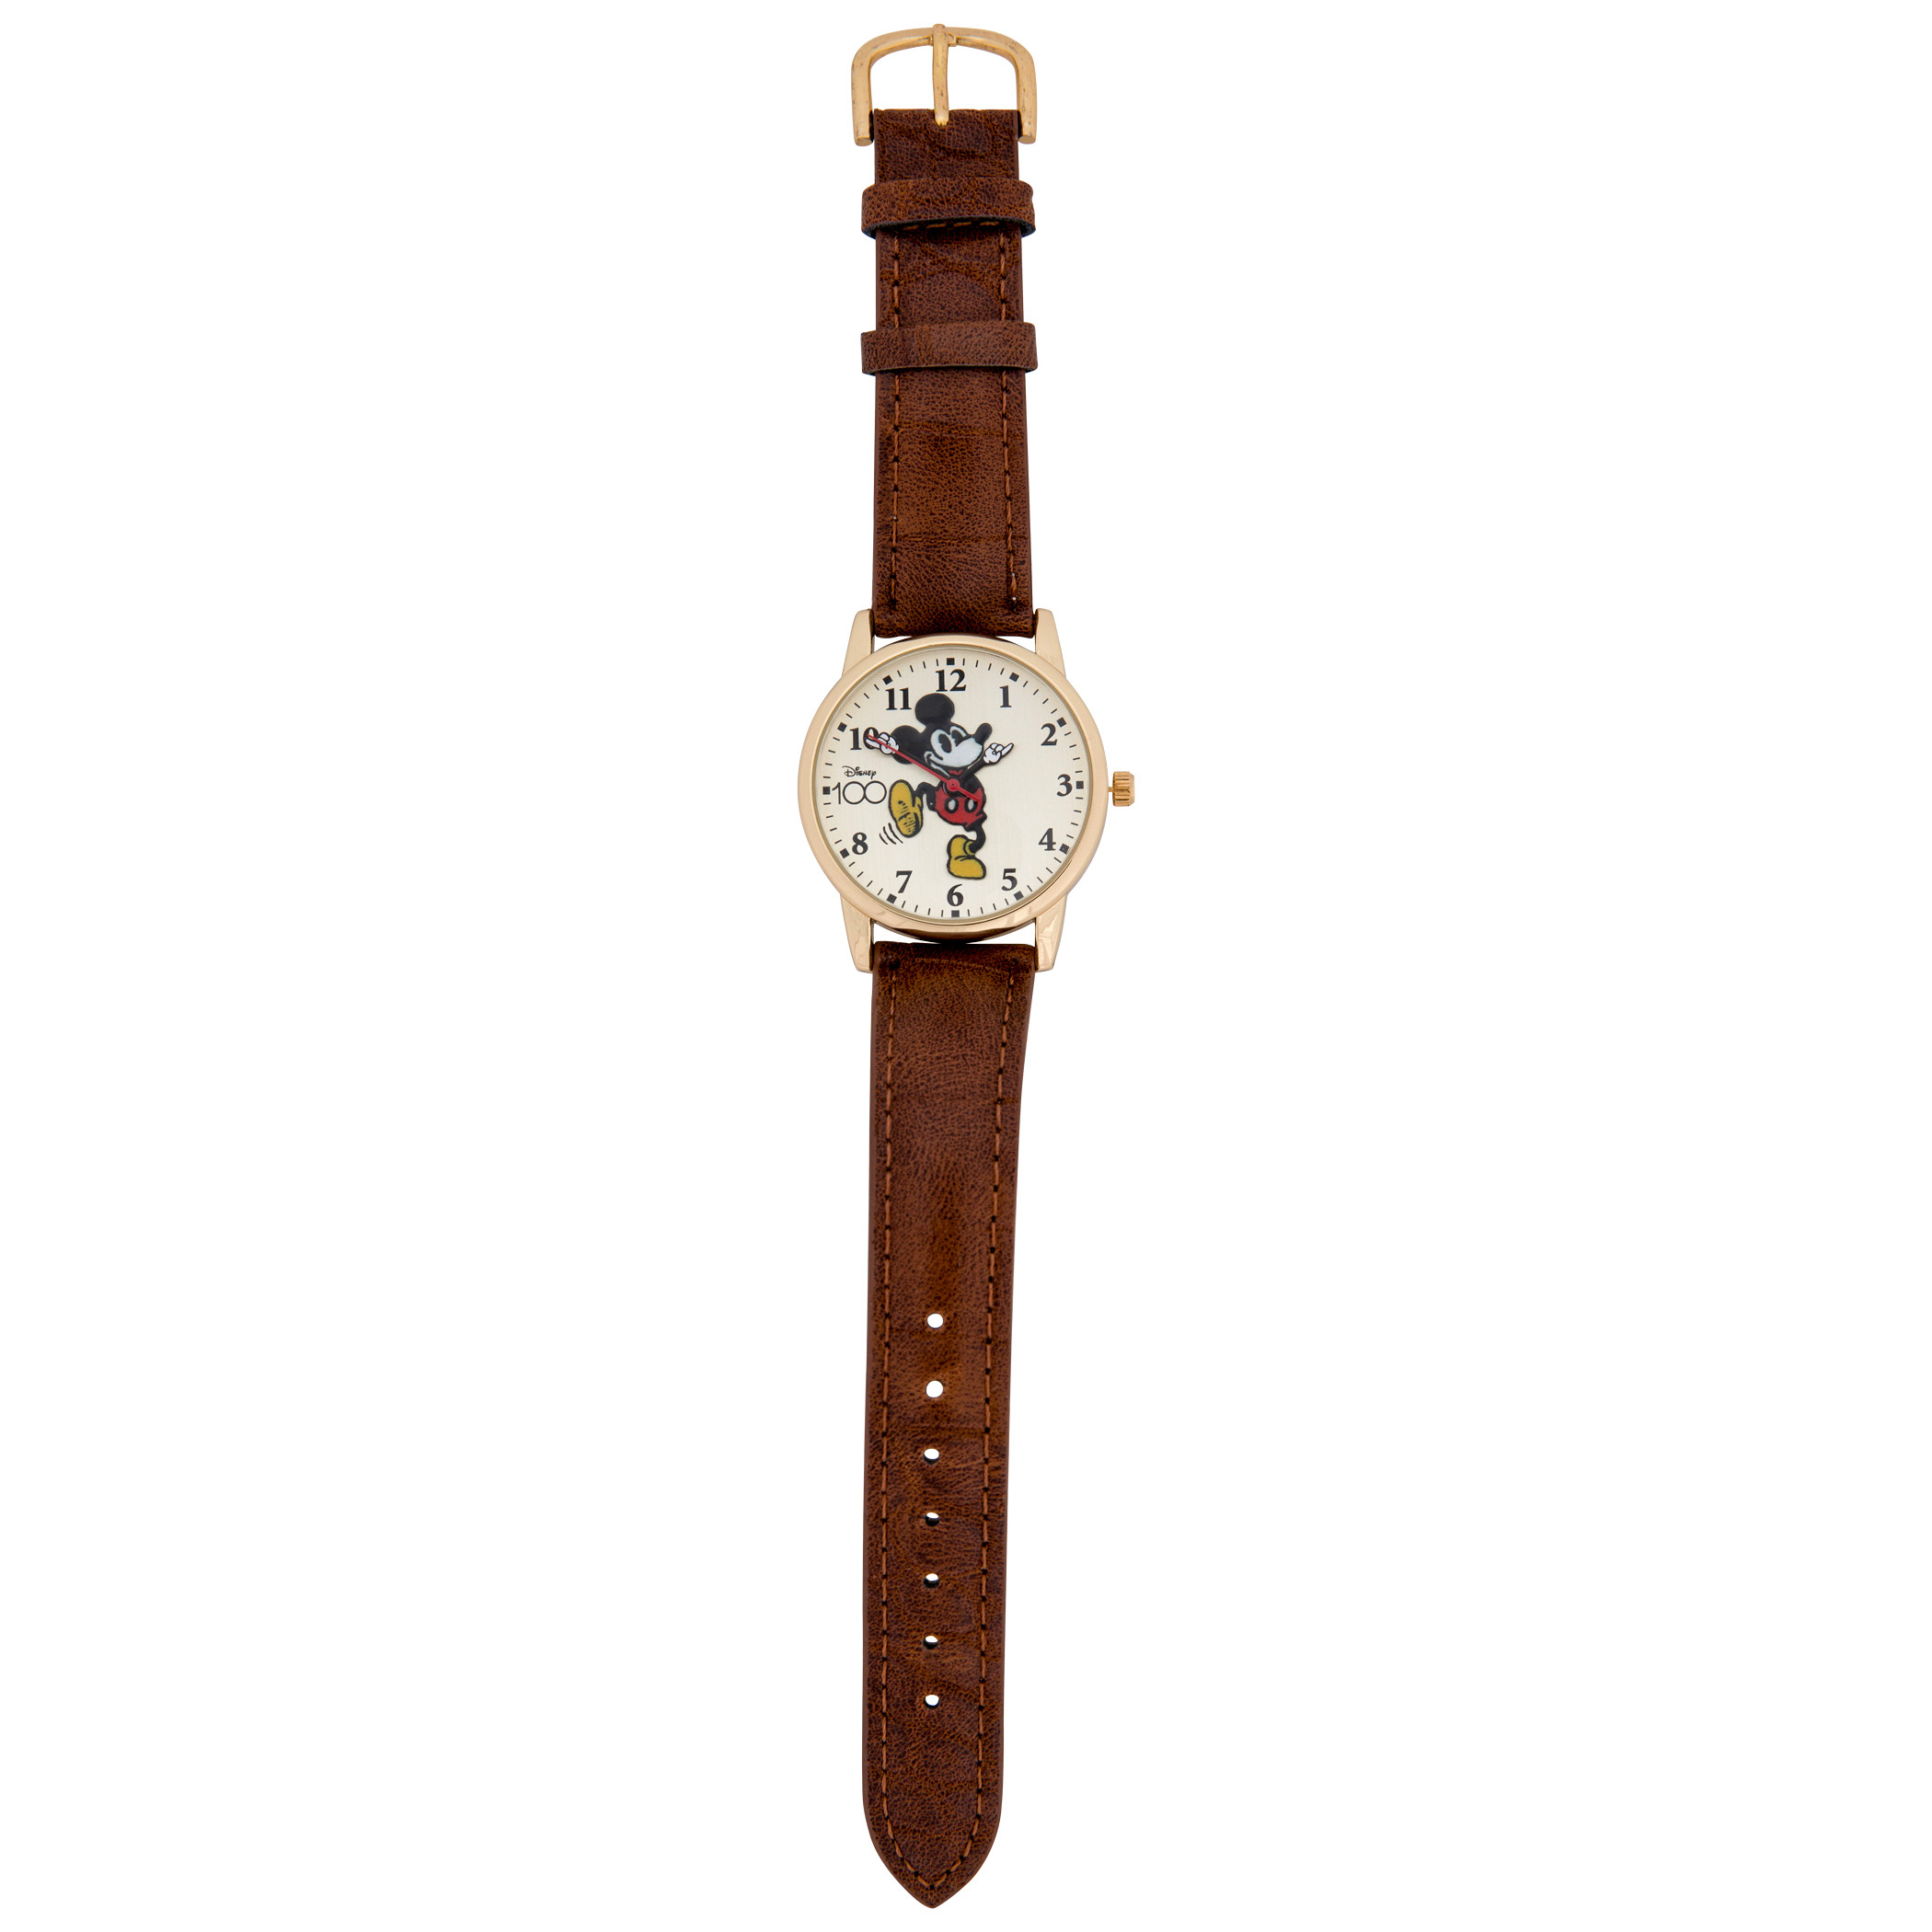 Mickey Mouse with Moving Watch Hands Analog Watch